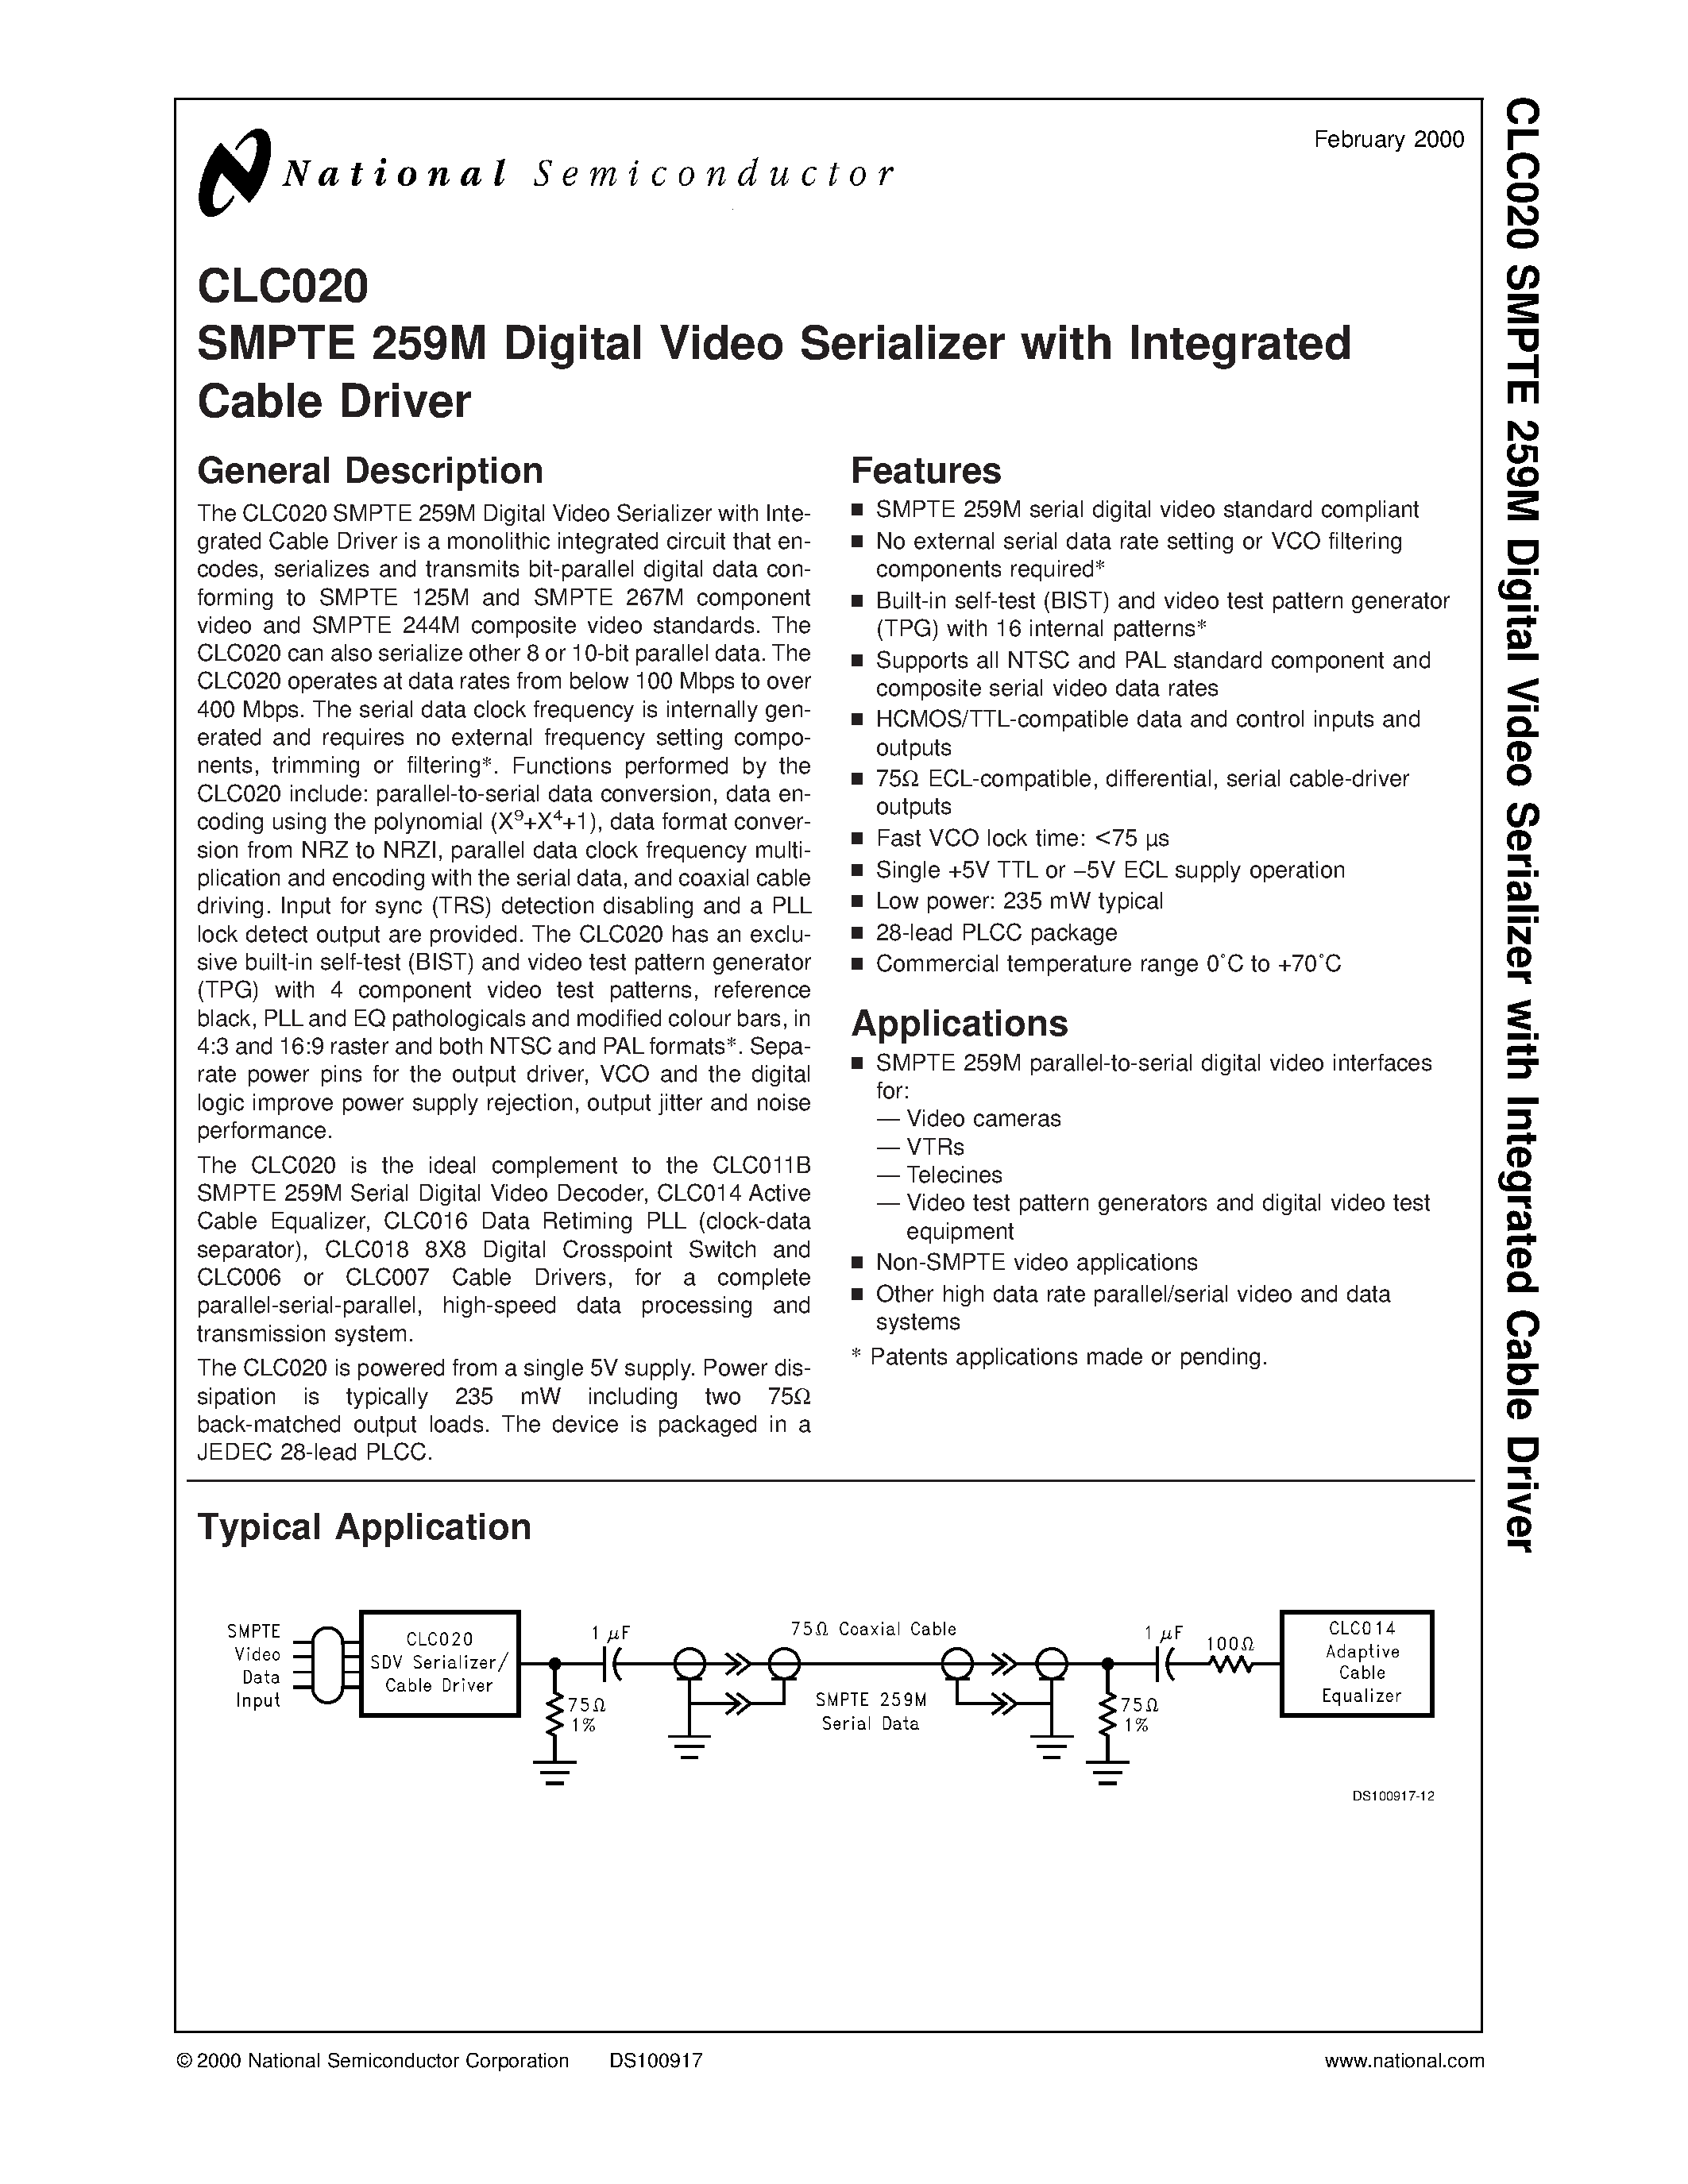 Datasheet CLC020ACQ - SMPTE 259M Digital Video Serializer with Integrated Cable Driver page 1